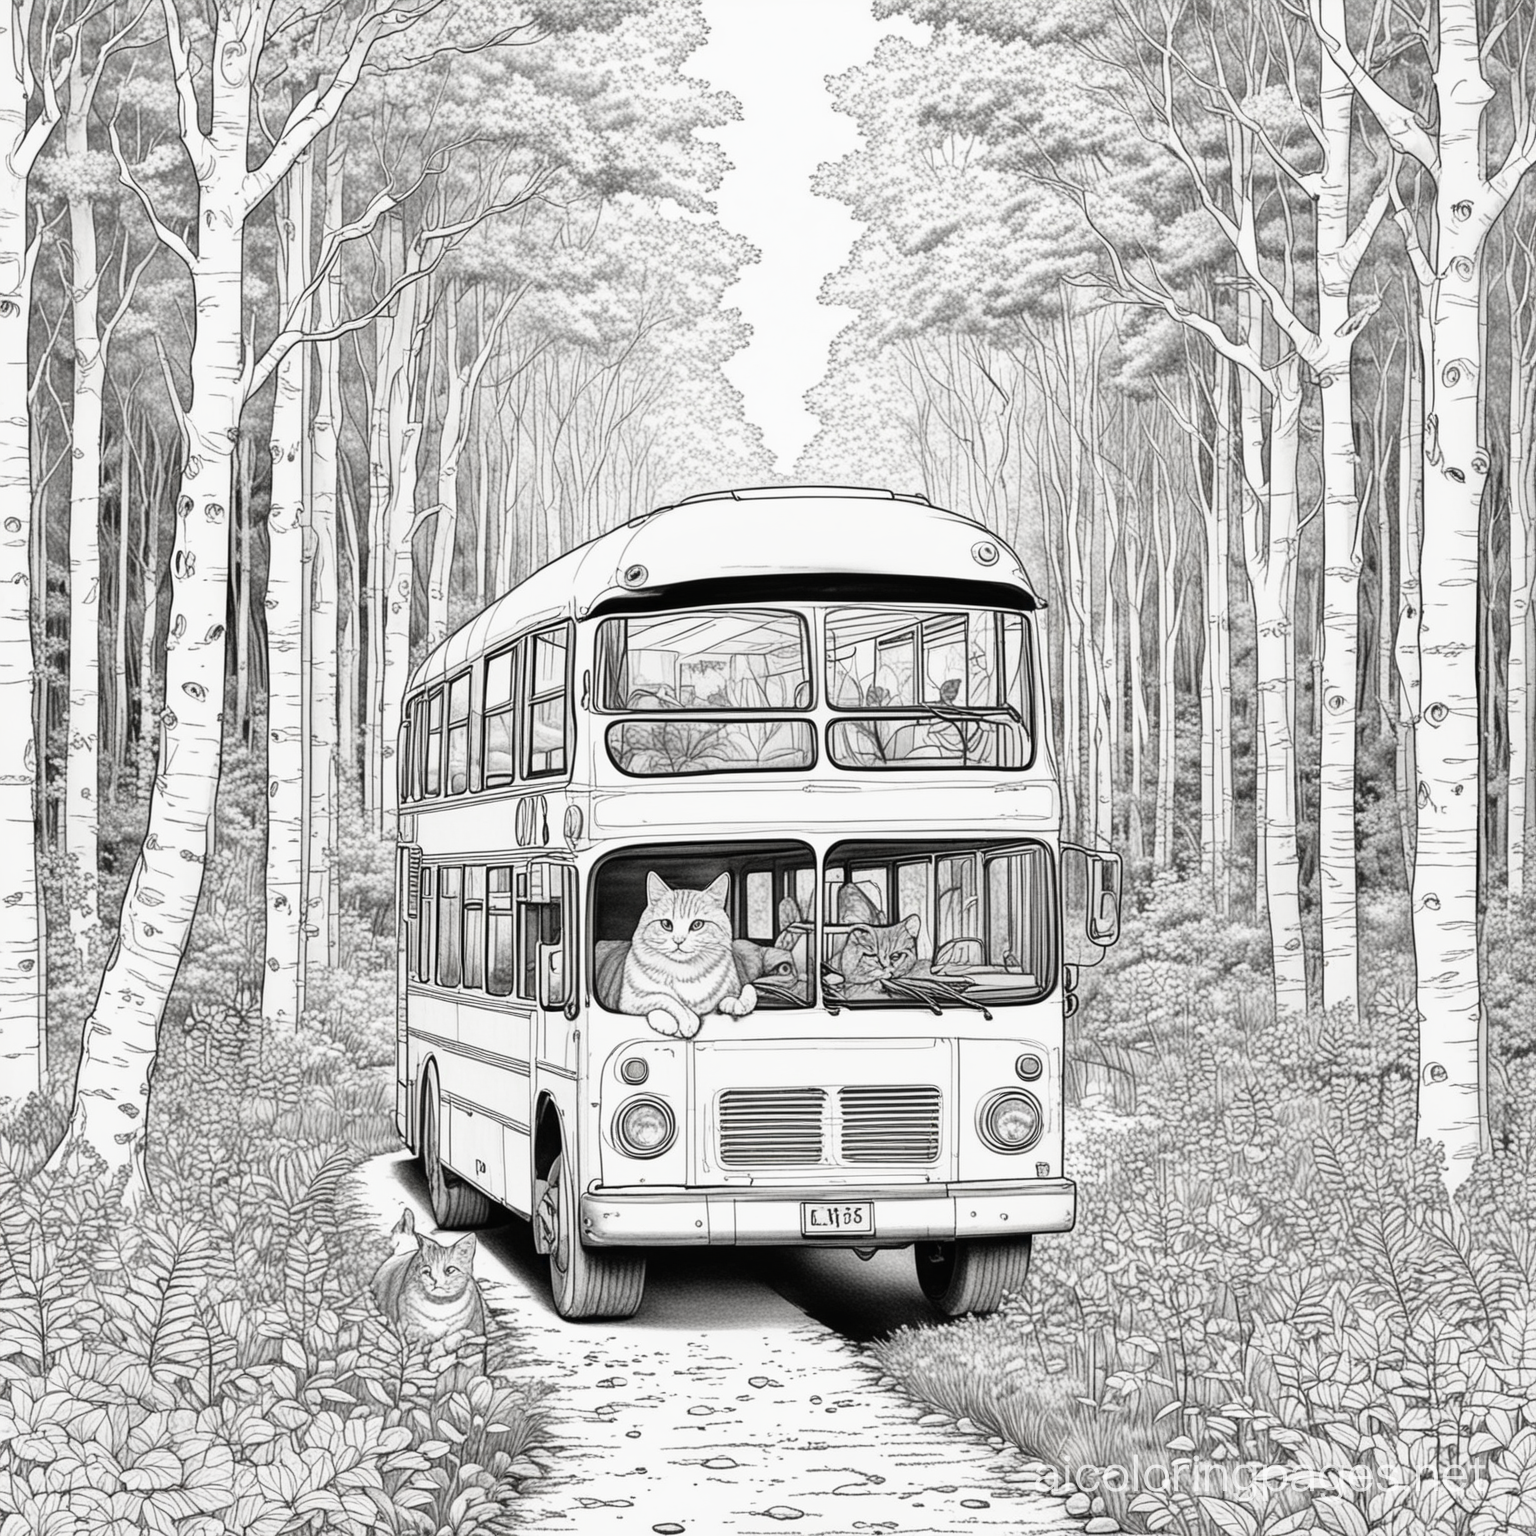 bus in the woods with a cat, Coloring Page, black and white, line art, white background, Simplicity, Ample White Space. The background of the coloring page is plain white to make it easy for young children to color within the lines. The outlines of all the subjects are easy to distinguish, making it simple for kids to color without too much difficulty